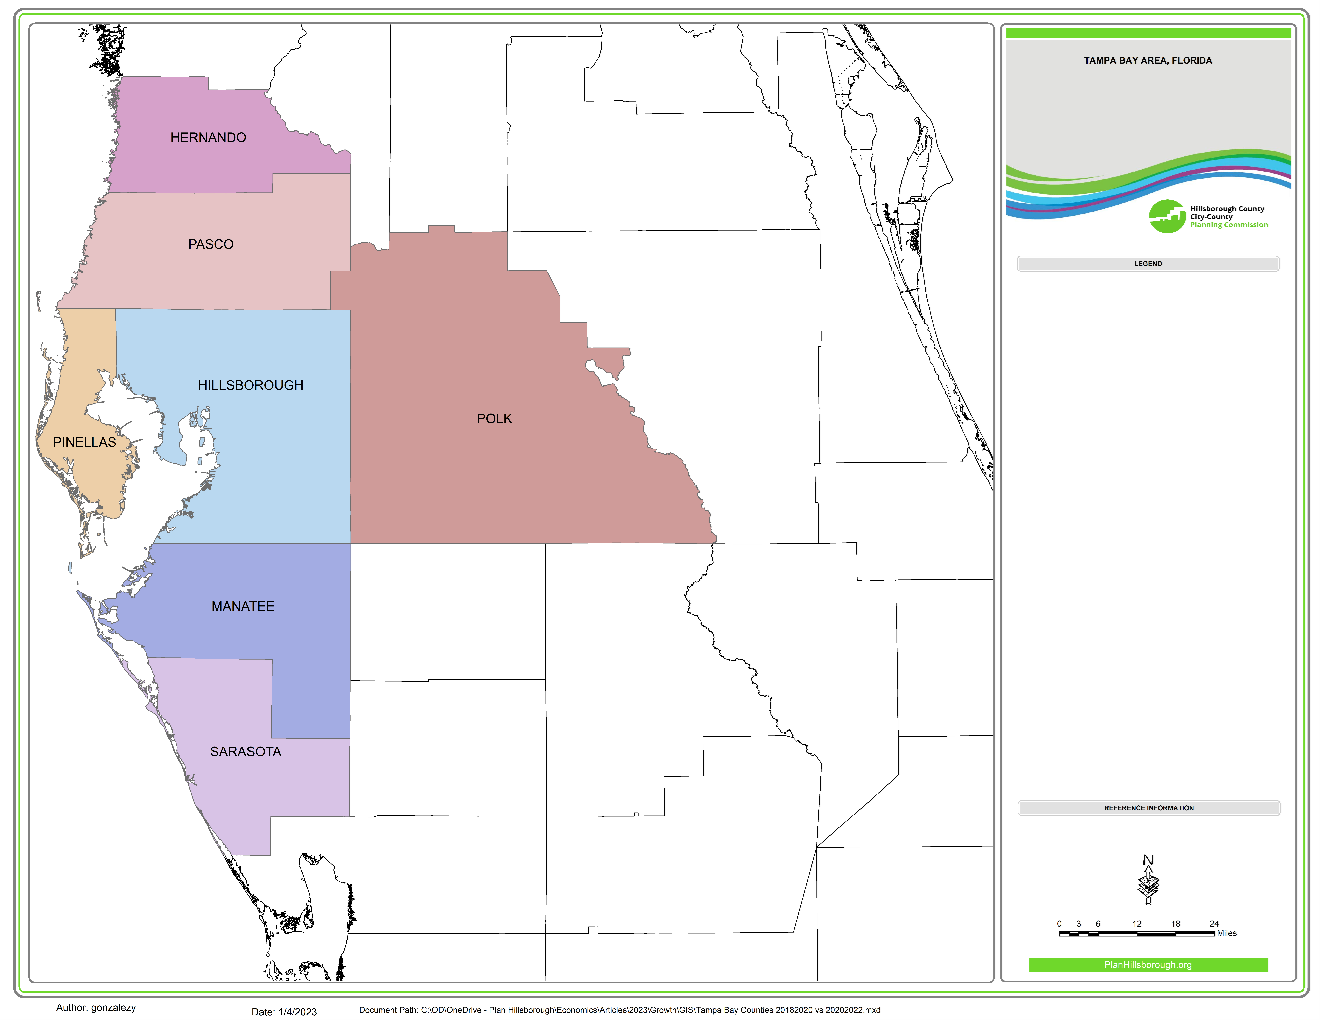 Figure 1 shows the 7 counties in the Tampa Bay Area: Hernando, Hillsborough, Manatee, Pasco, Pinellas, Polk, and Sarasota Counties.